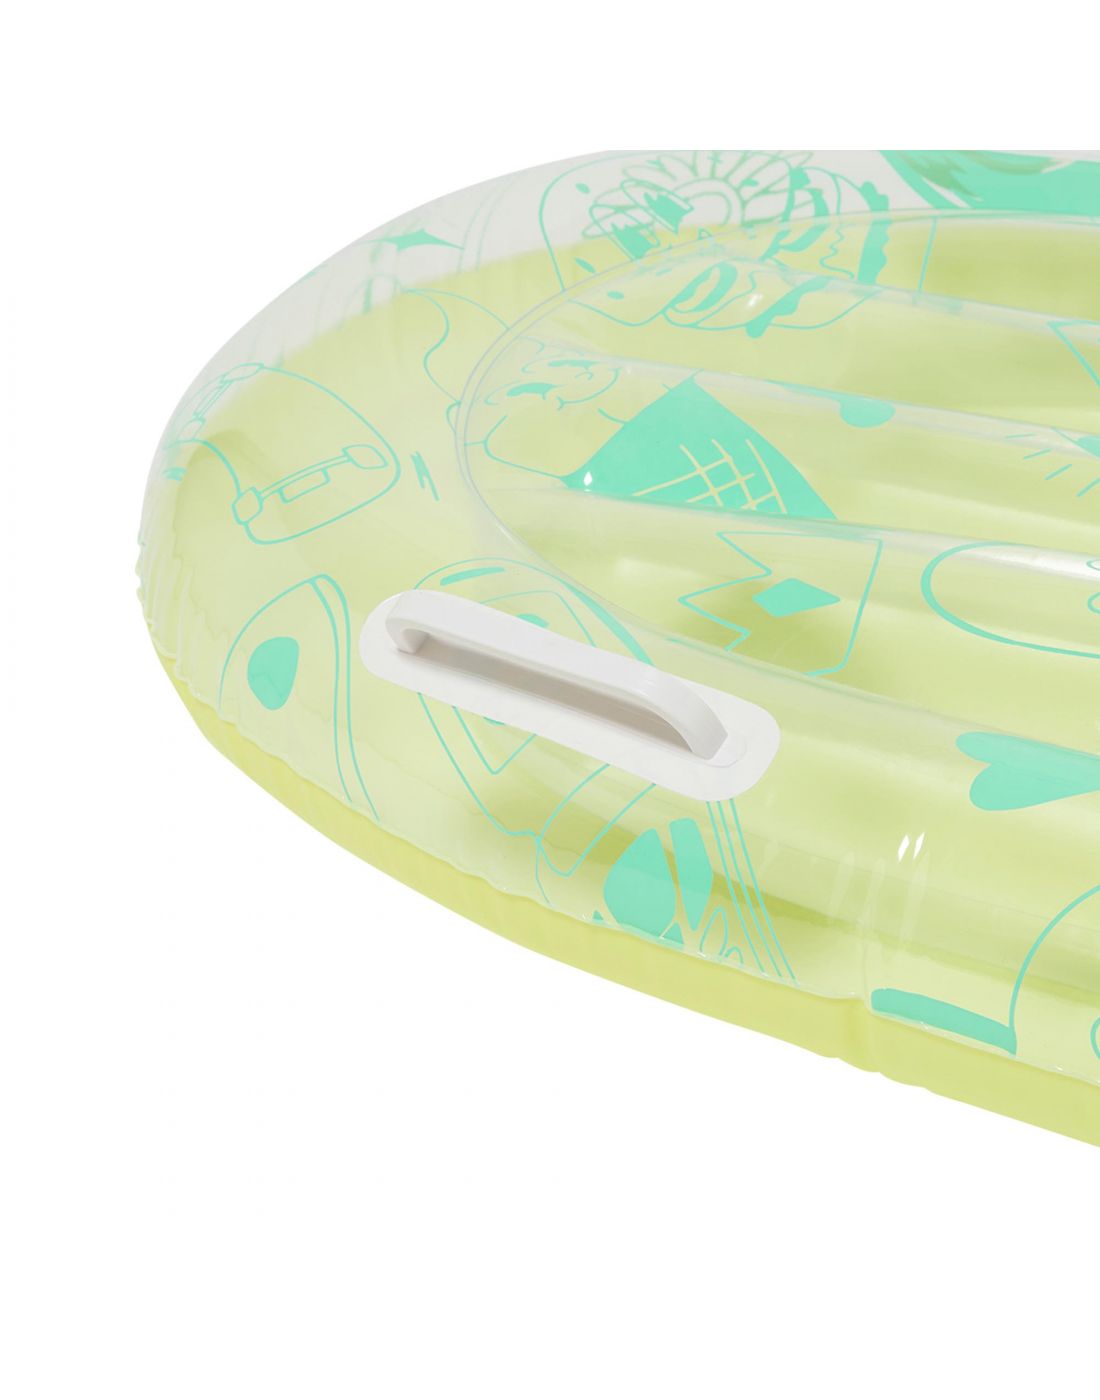 SunnyLife Inflatable Body Board The Sea Kids Blue-Lime